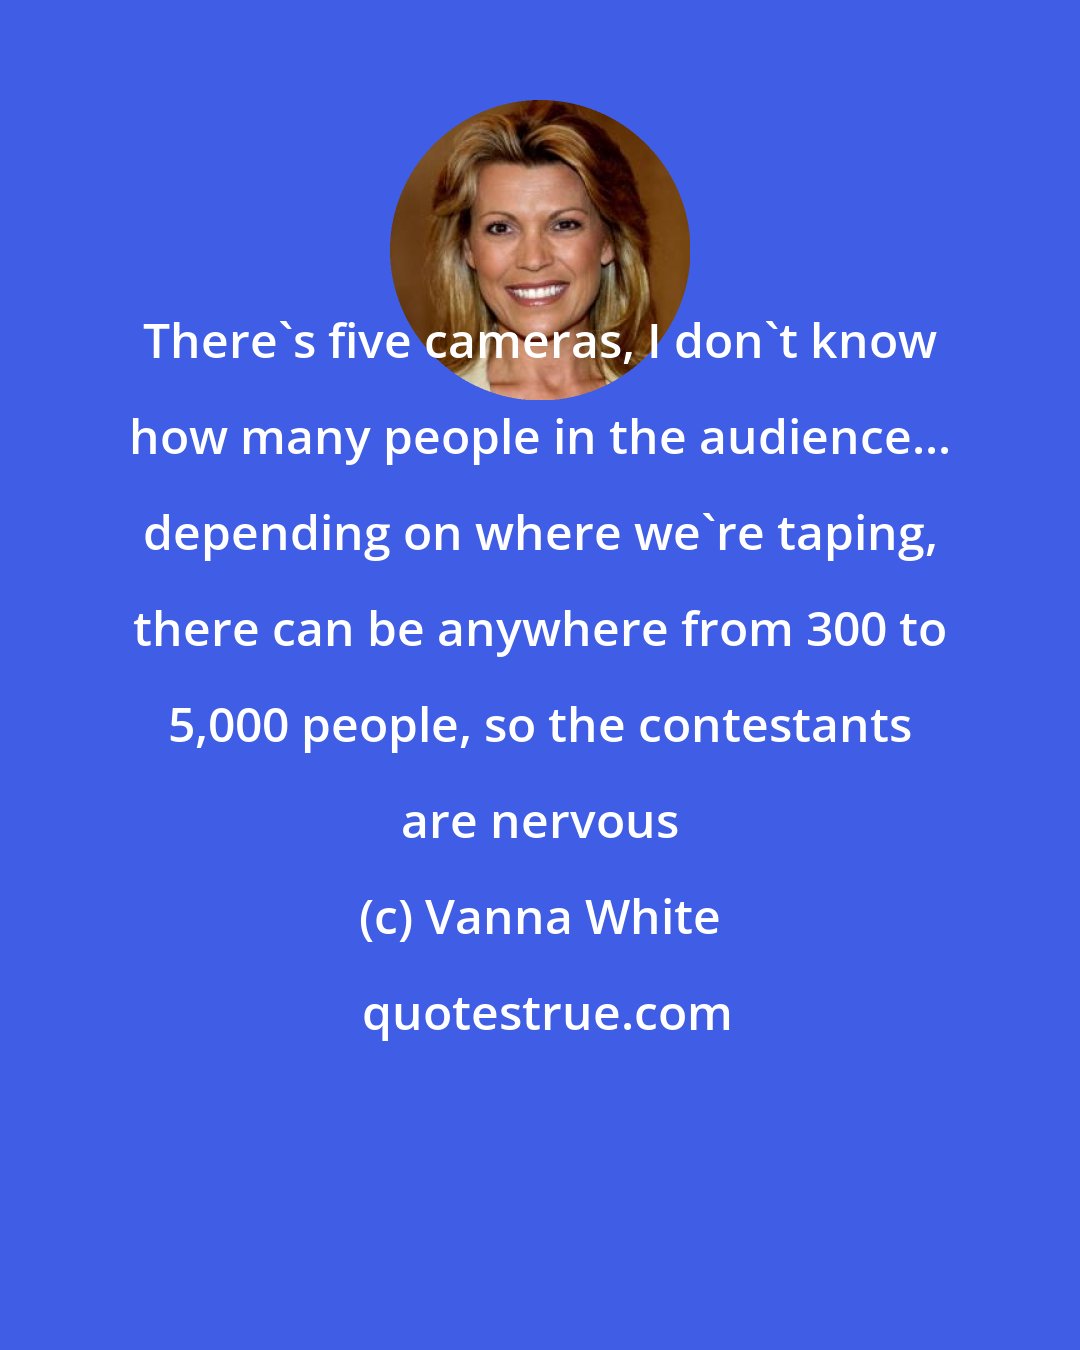 Vanna White: There's five cameras, I don't know how many people in the audience... depending on where we're taping, there can be anywhere from 300 to 5,000 people, so the contestants are nervous